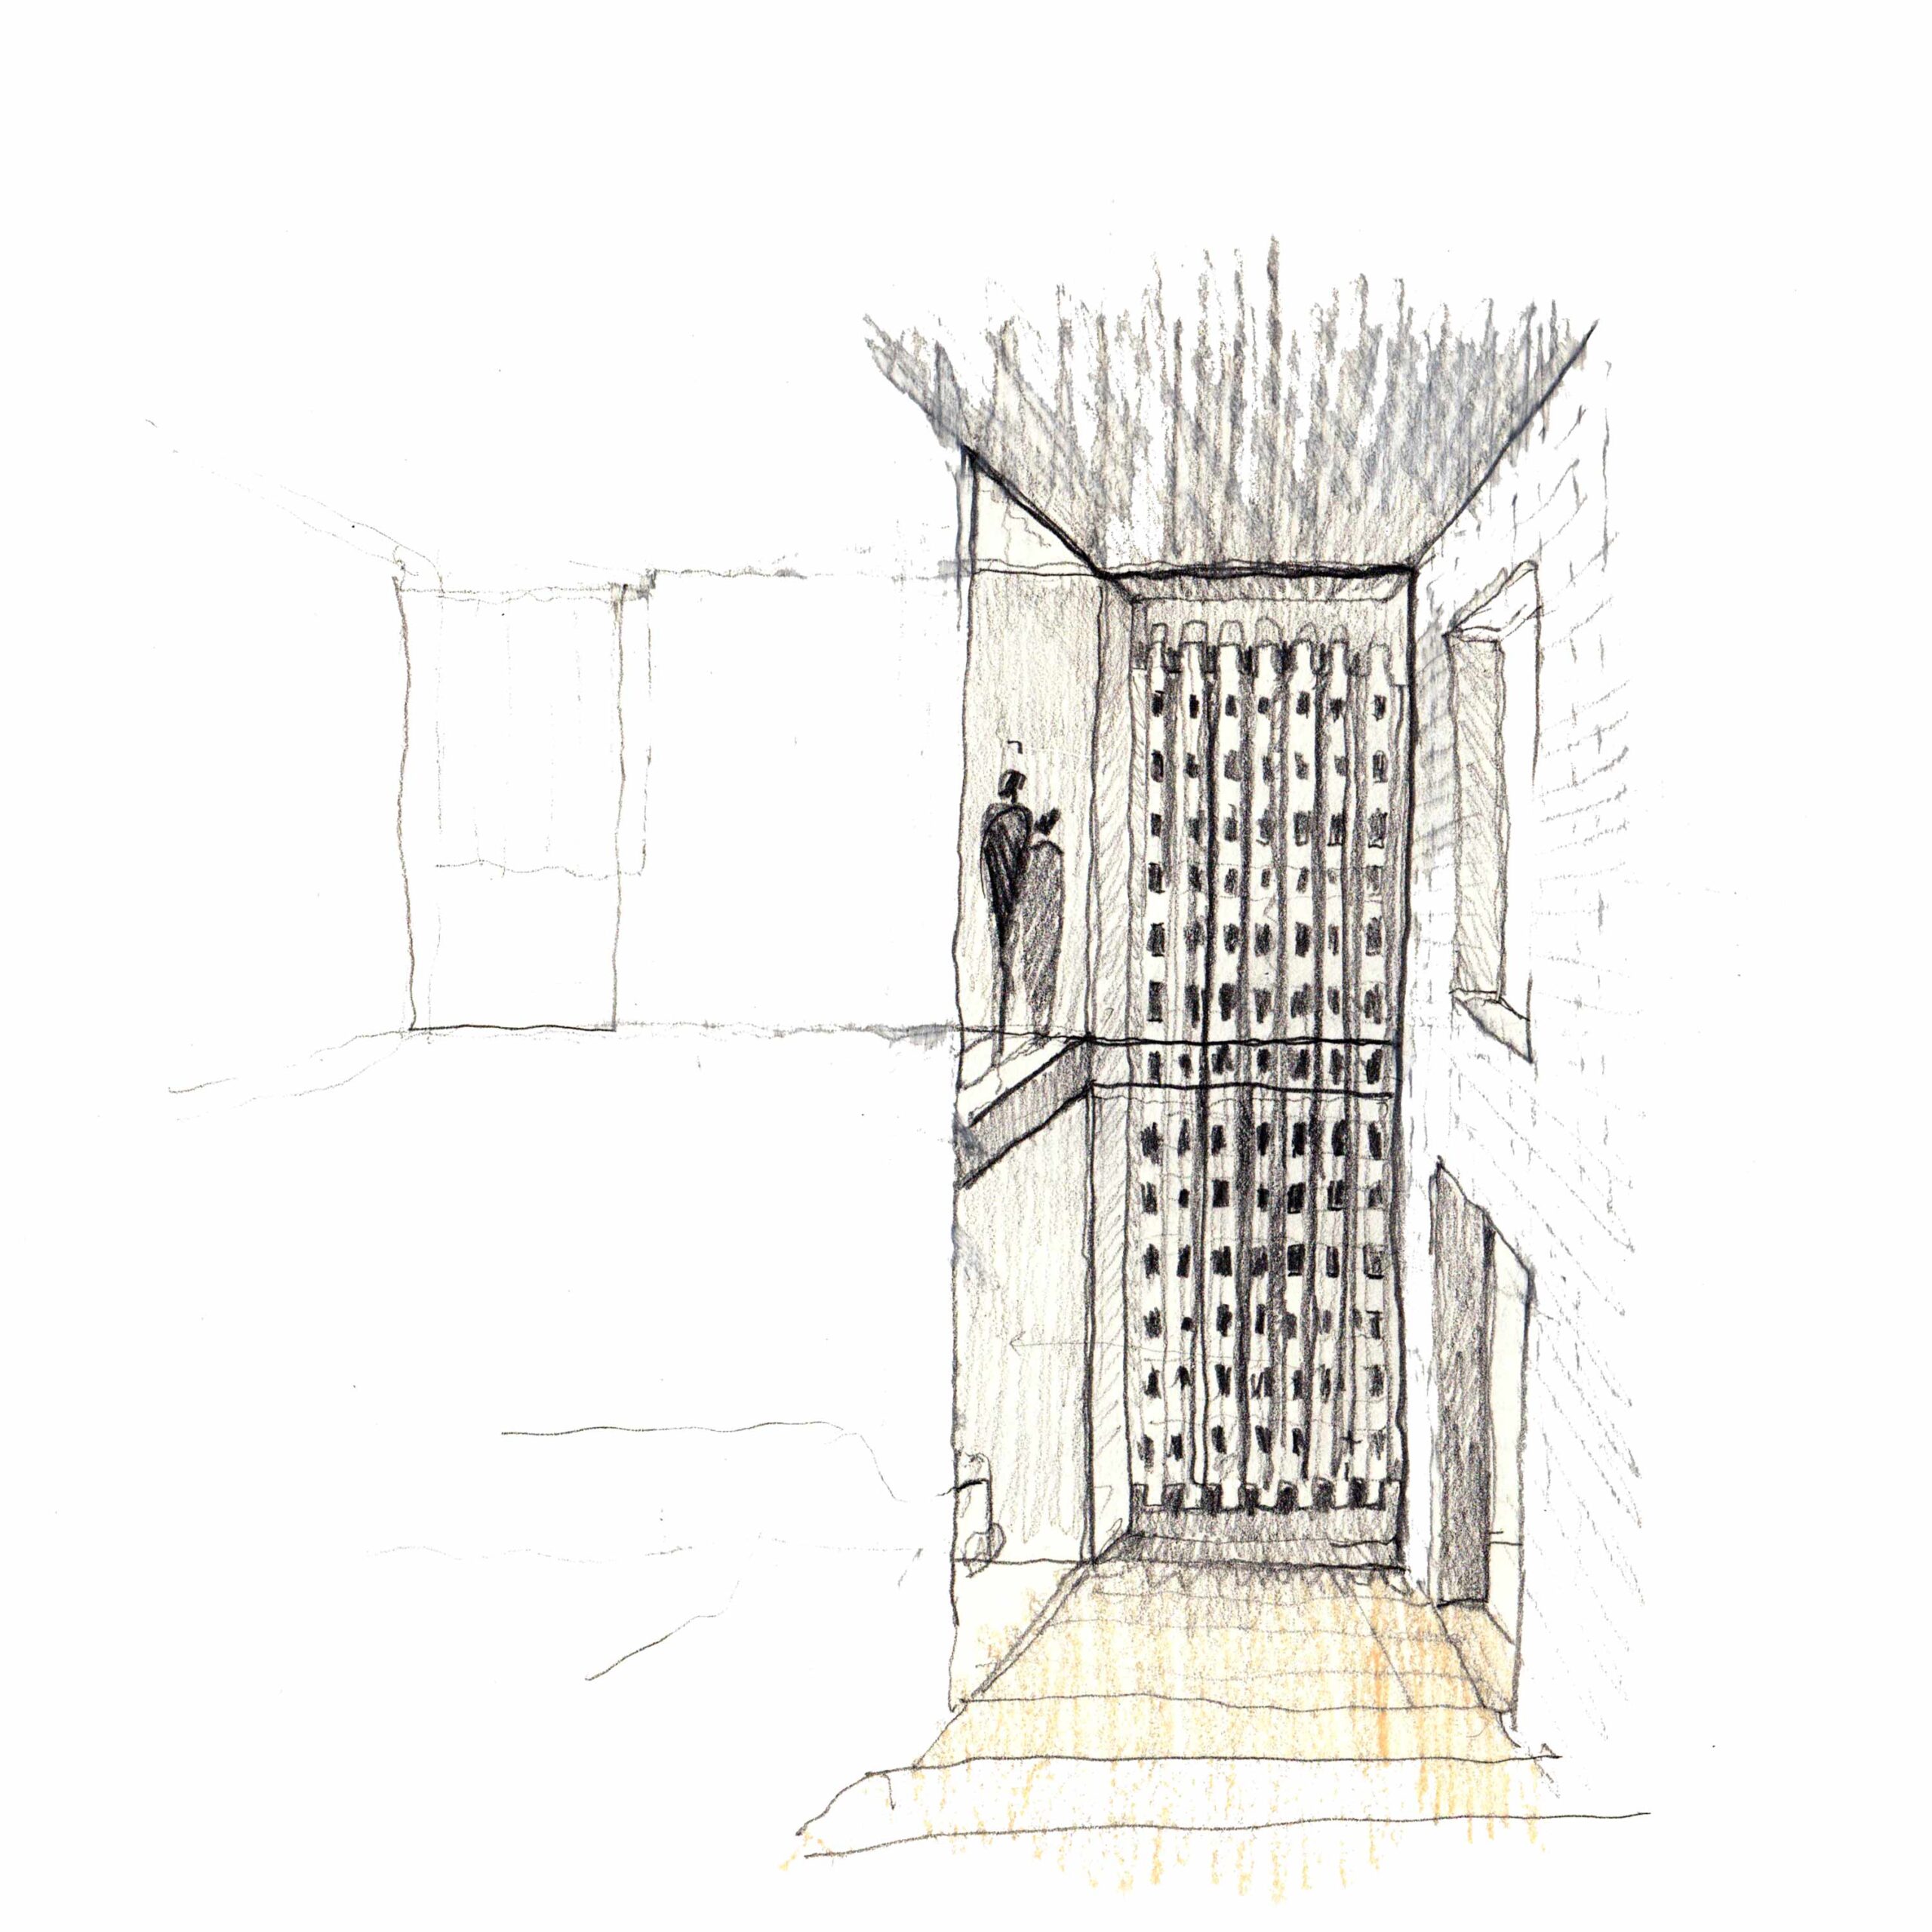 Sketch of the stairwell and perforated brick façade.